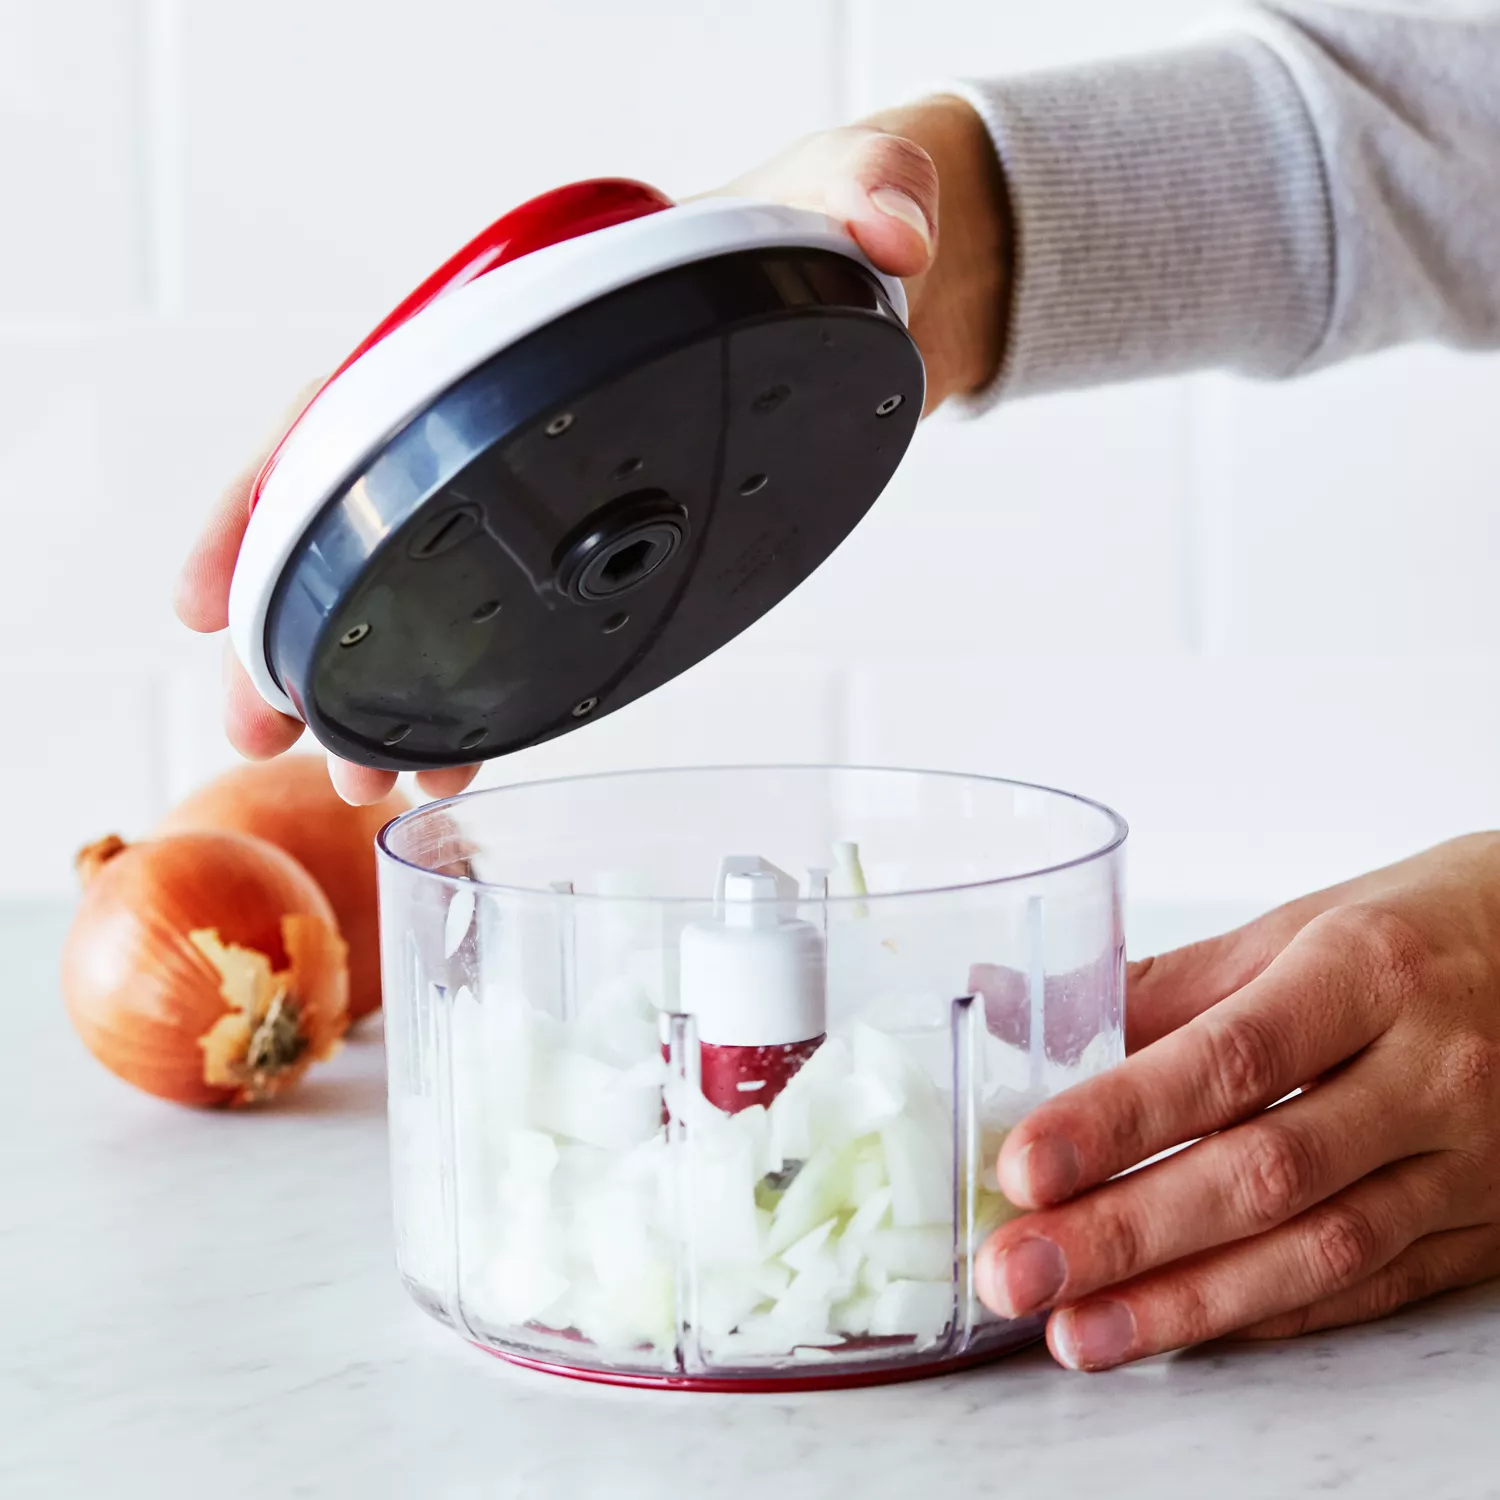  Hand Powered Food Chopper,Portable Easy Pull Food